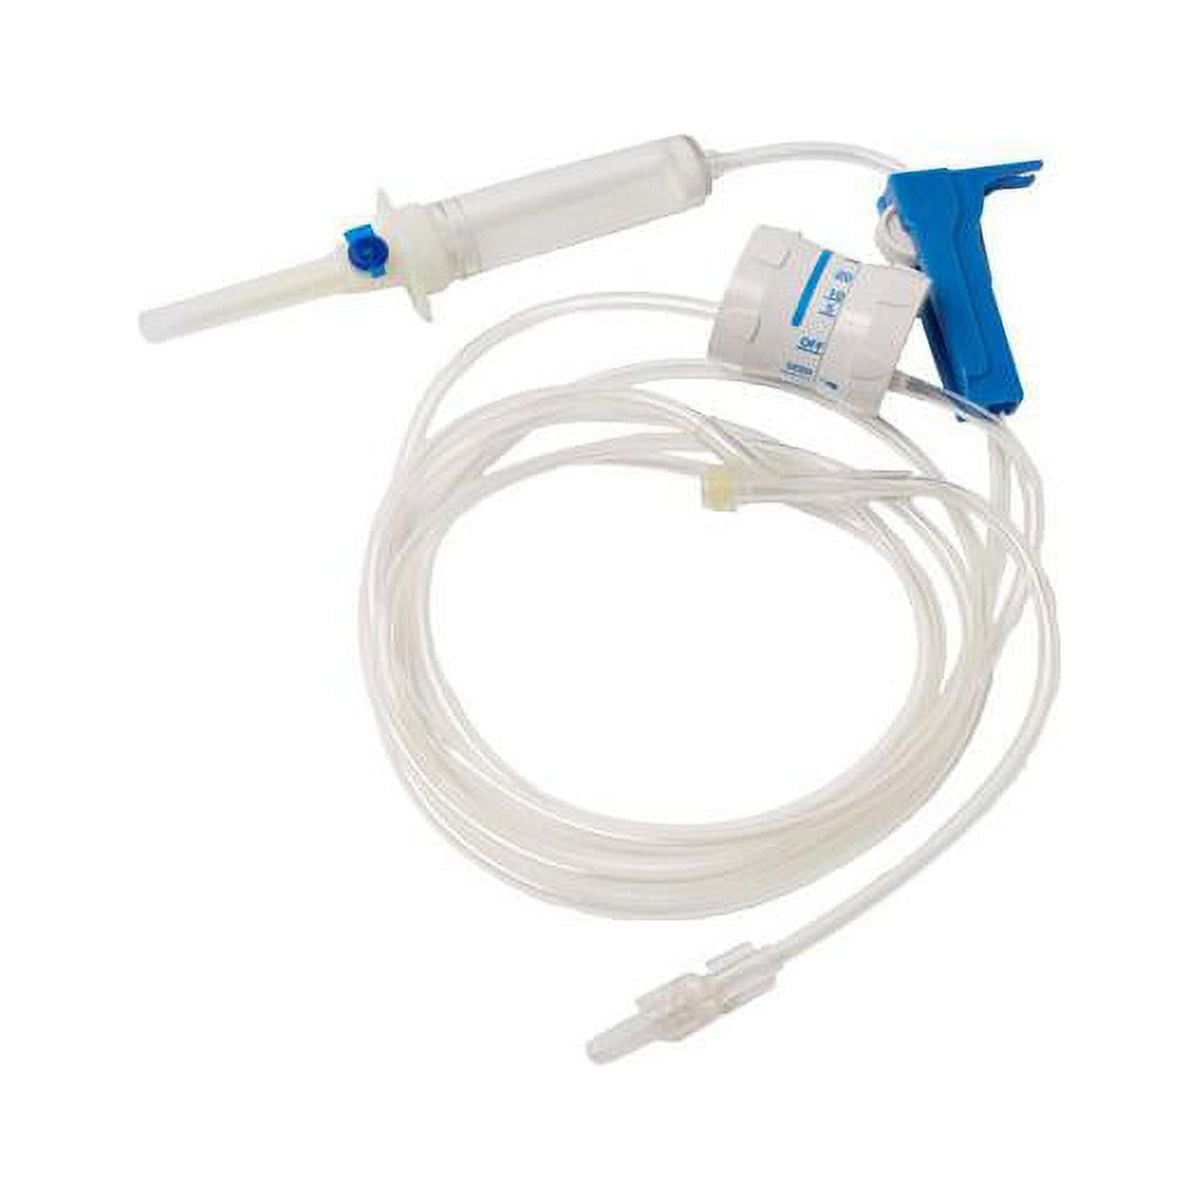 I.v. Administration Set With Gvs Easydrop Flow Rregulator, Dehp-free, 1  Y-site, 15 Filter In Drip Chamber, Swivel, Luer Lock, 92 Part No.  Tcbinf033g (1/ea) 